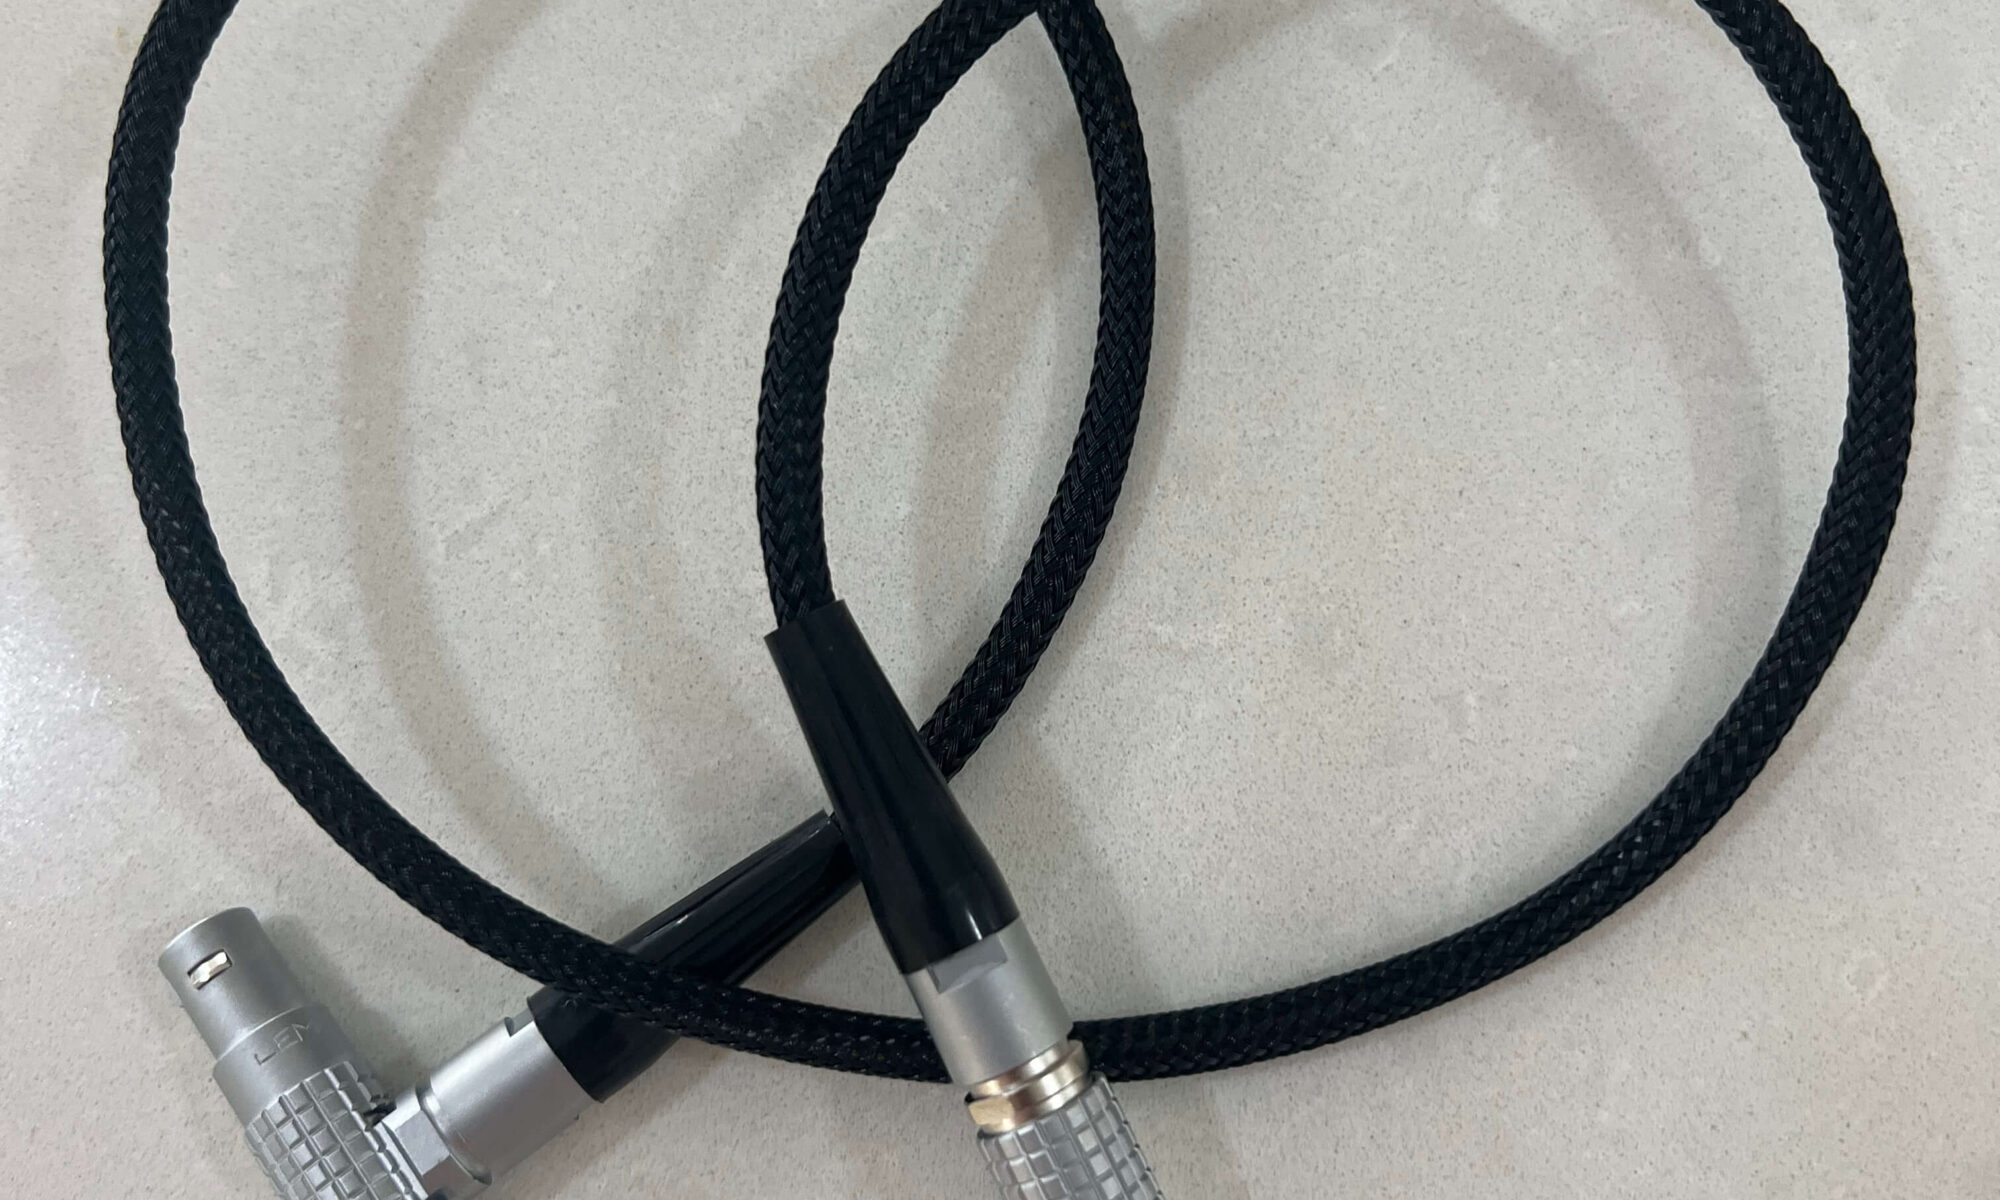 Volt gimbal cable